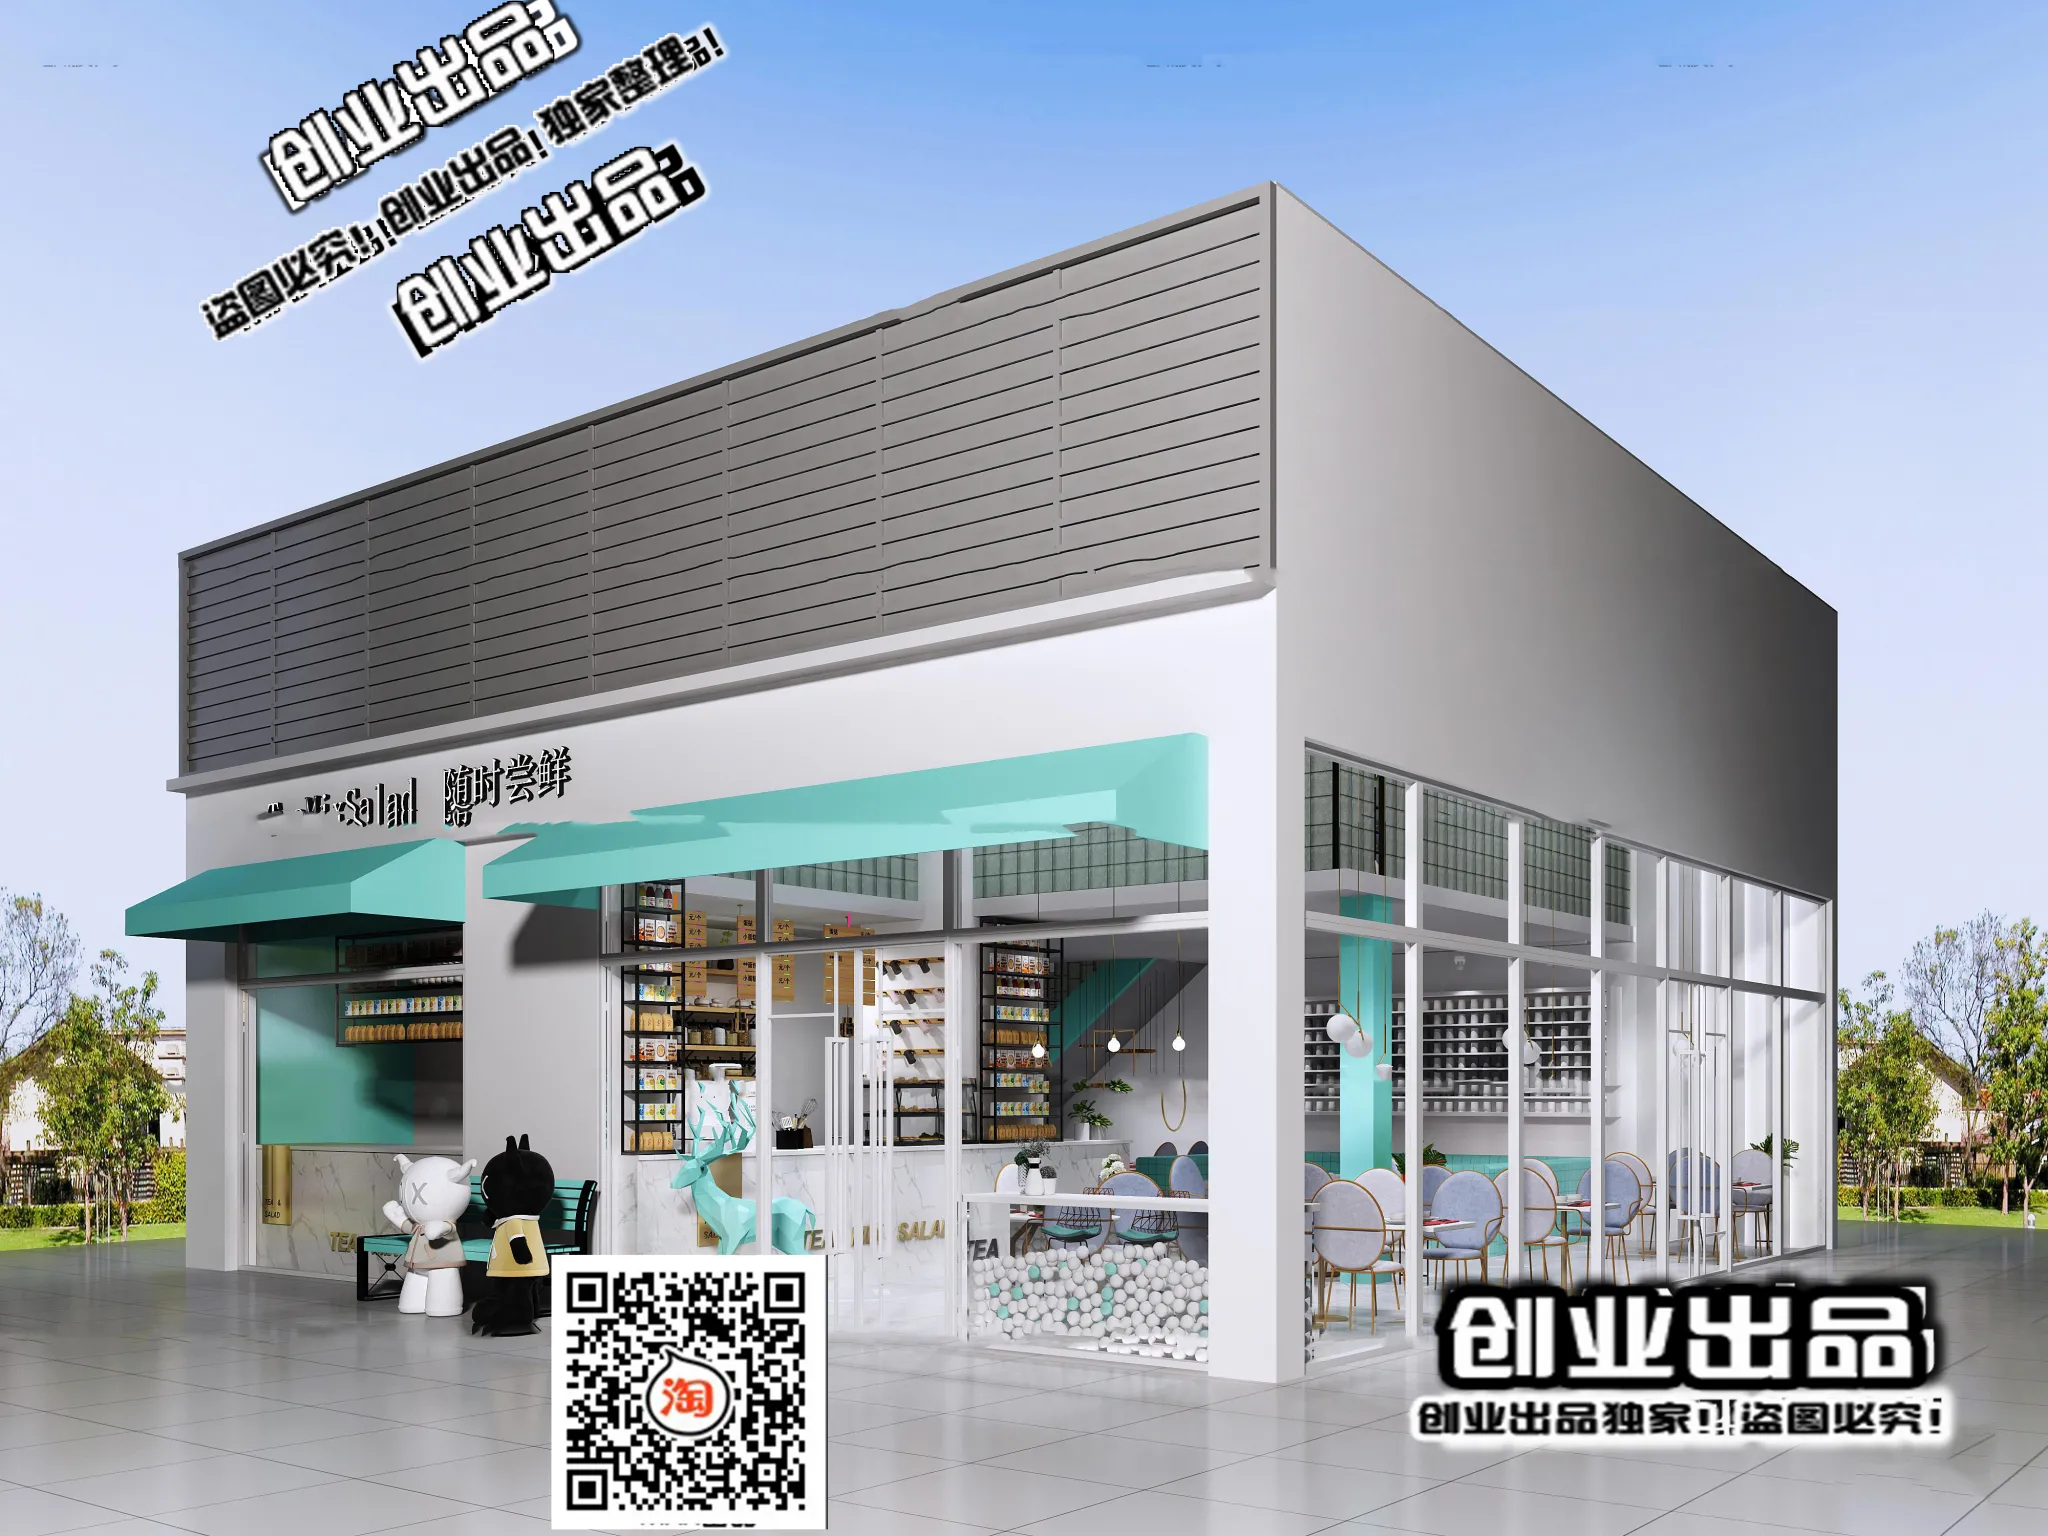 FASTFOOD STORE – 3D SCENES – 0158